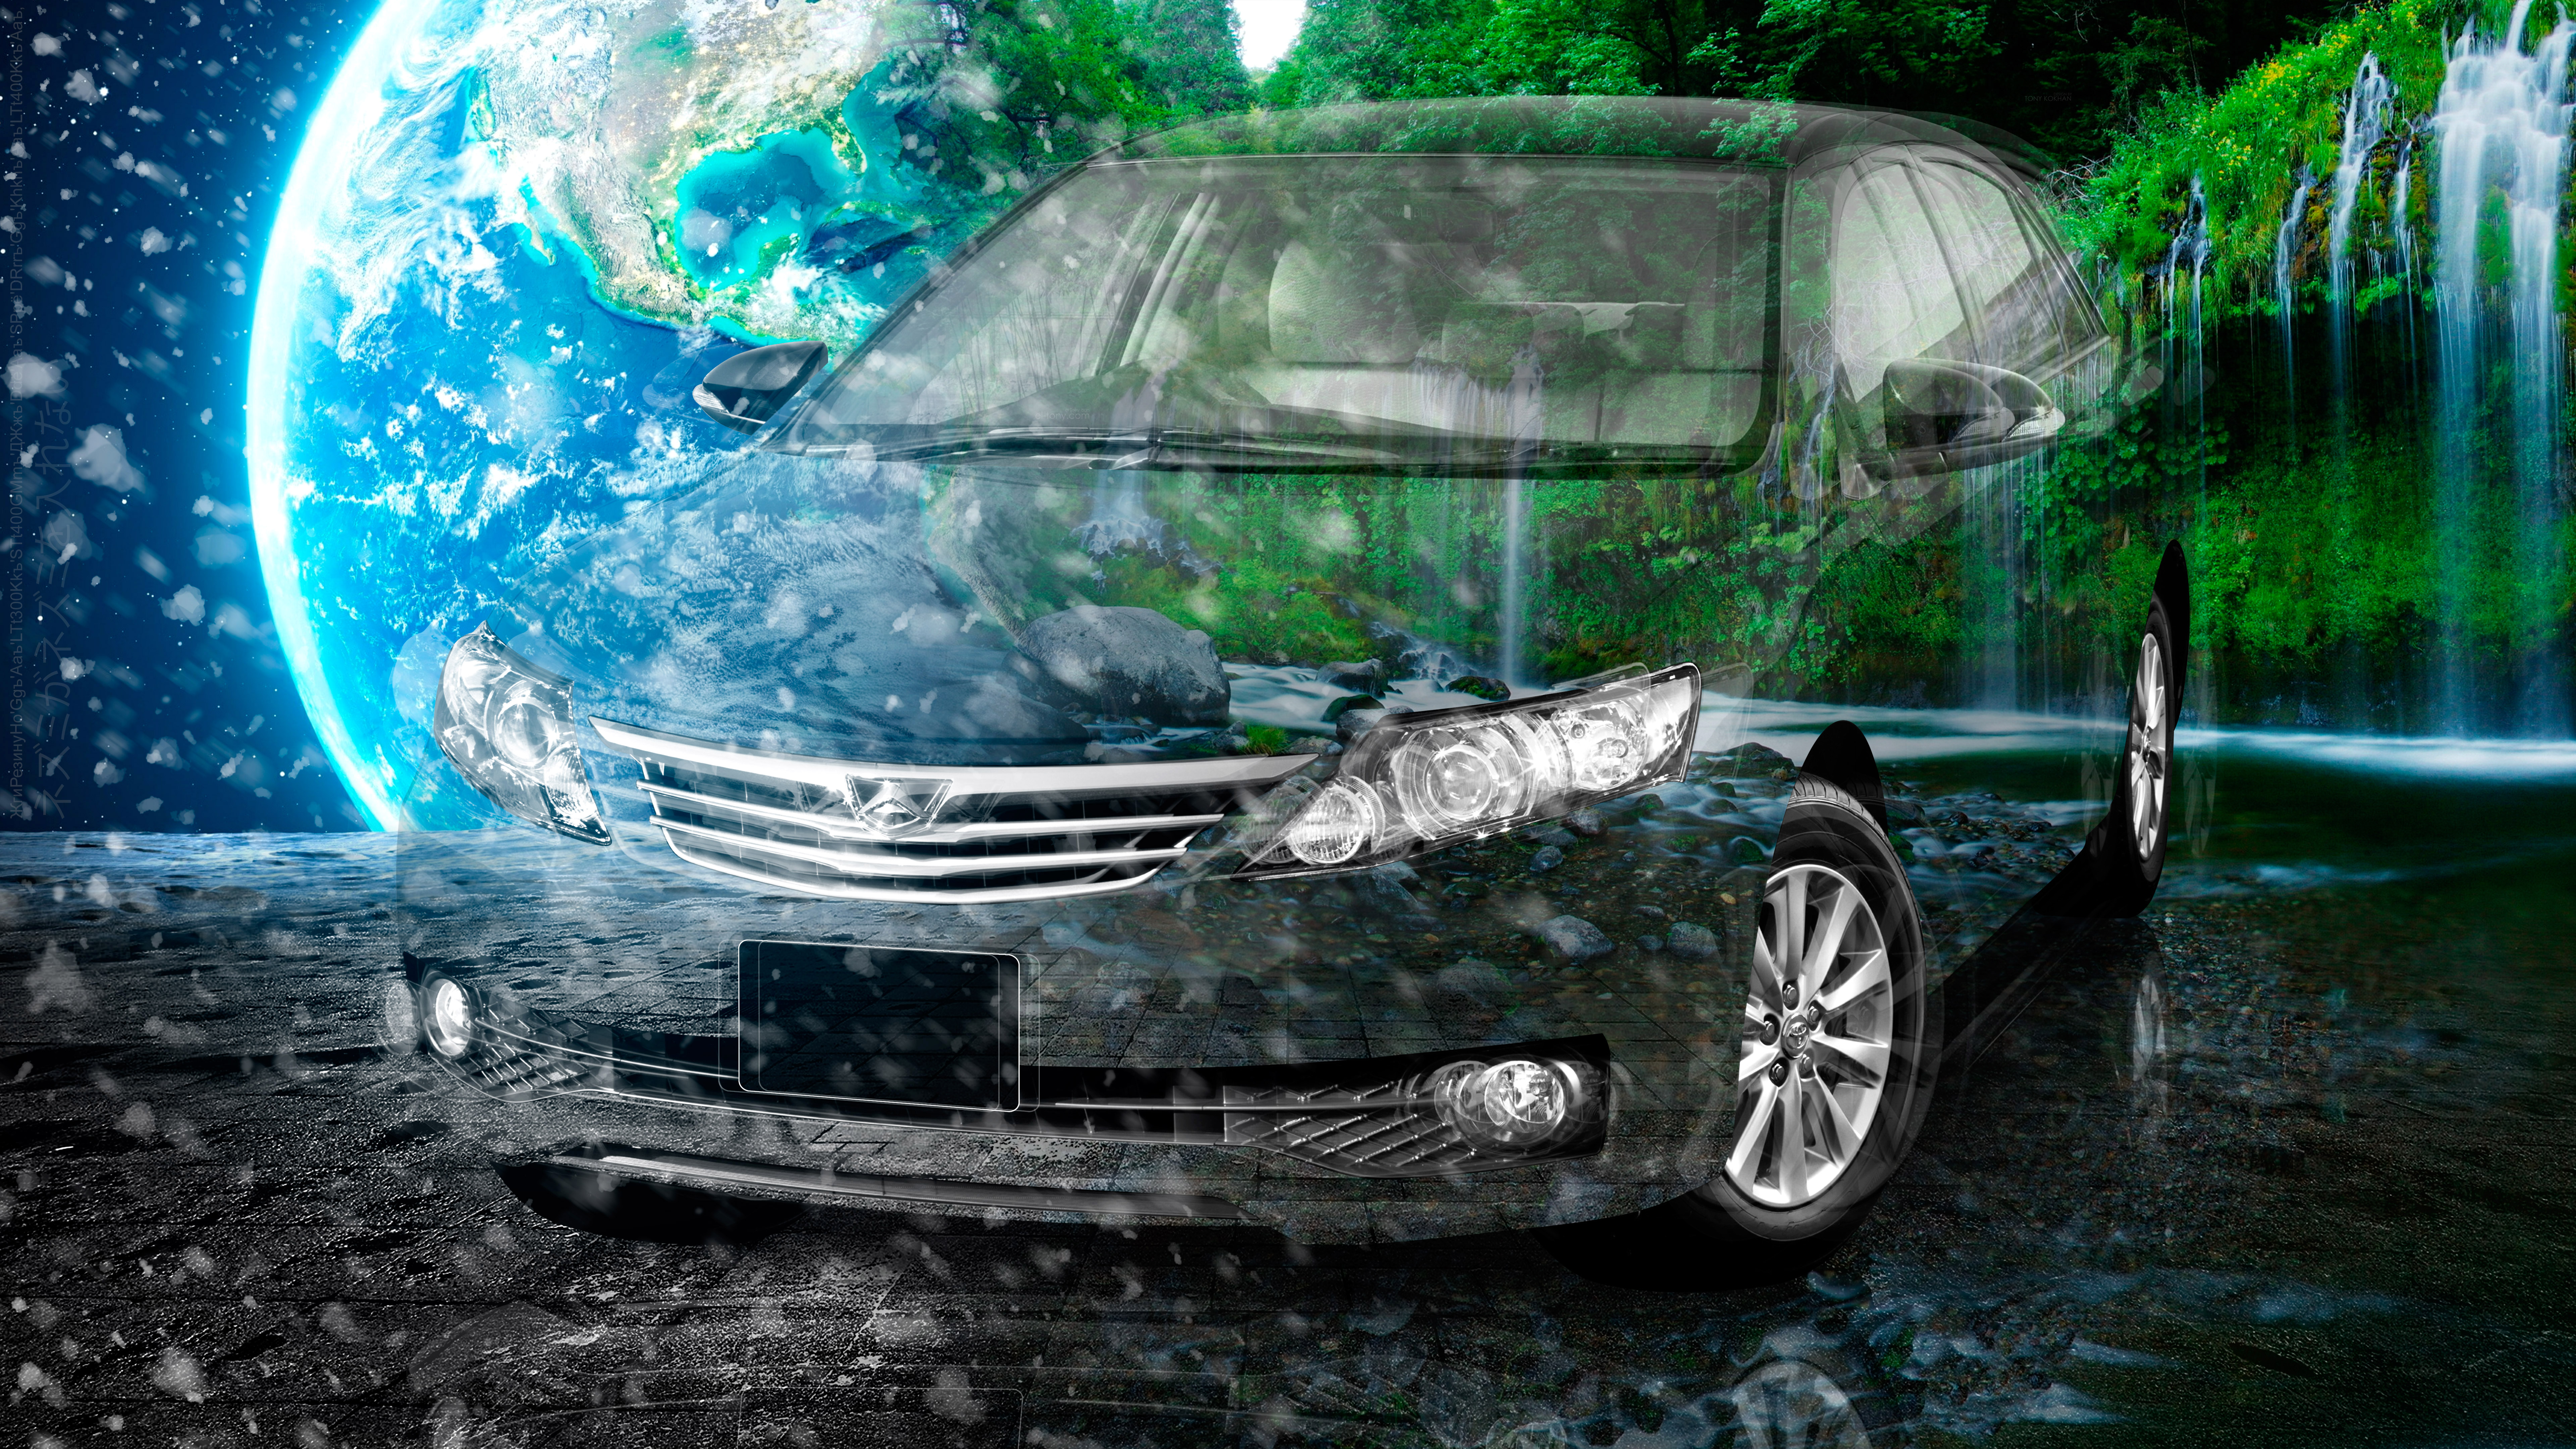 Toyota-Allion-Super-Crystal-RatDoesntLetMouseIn-Snow-Nature-Waterfall-Planet-Earth-Art-Car